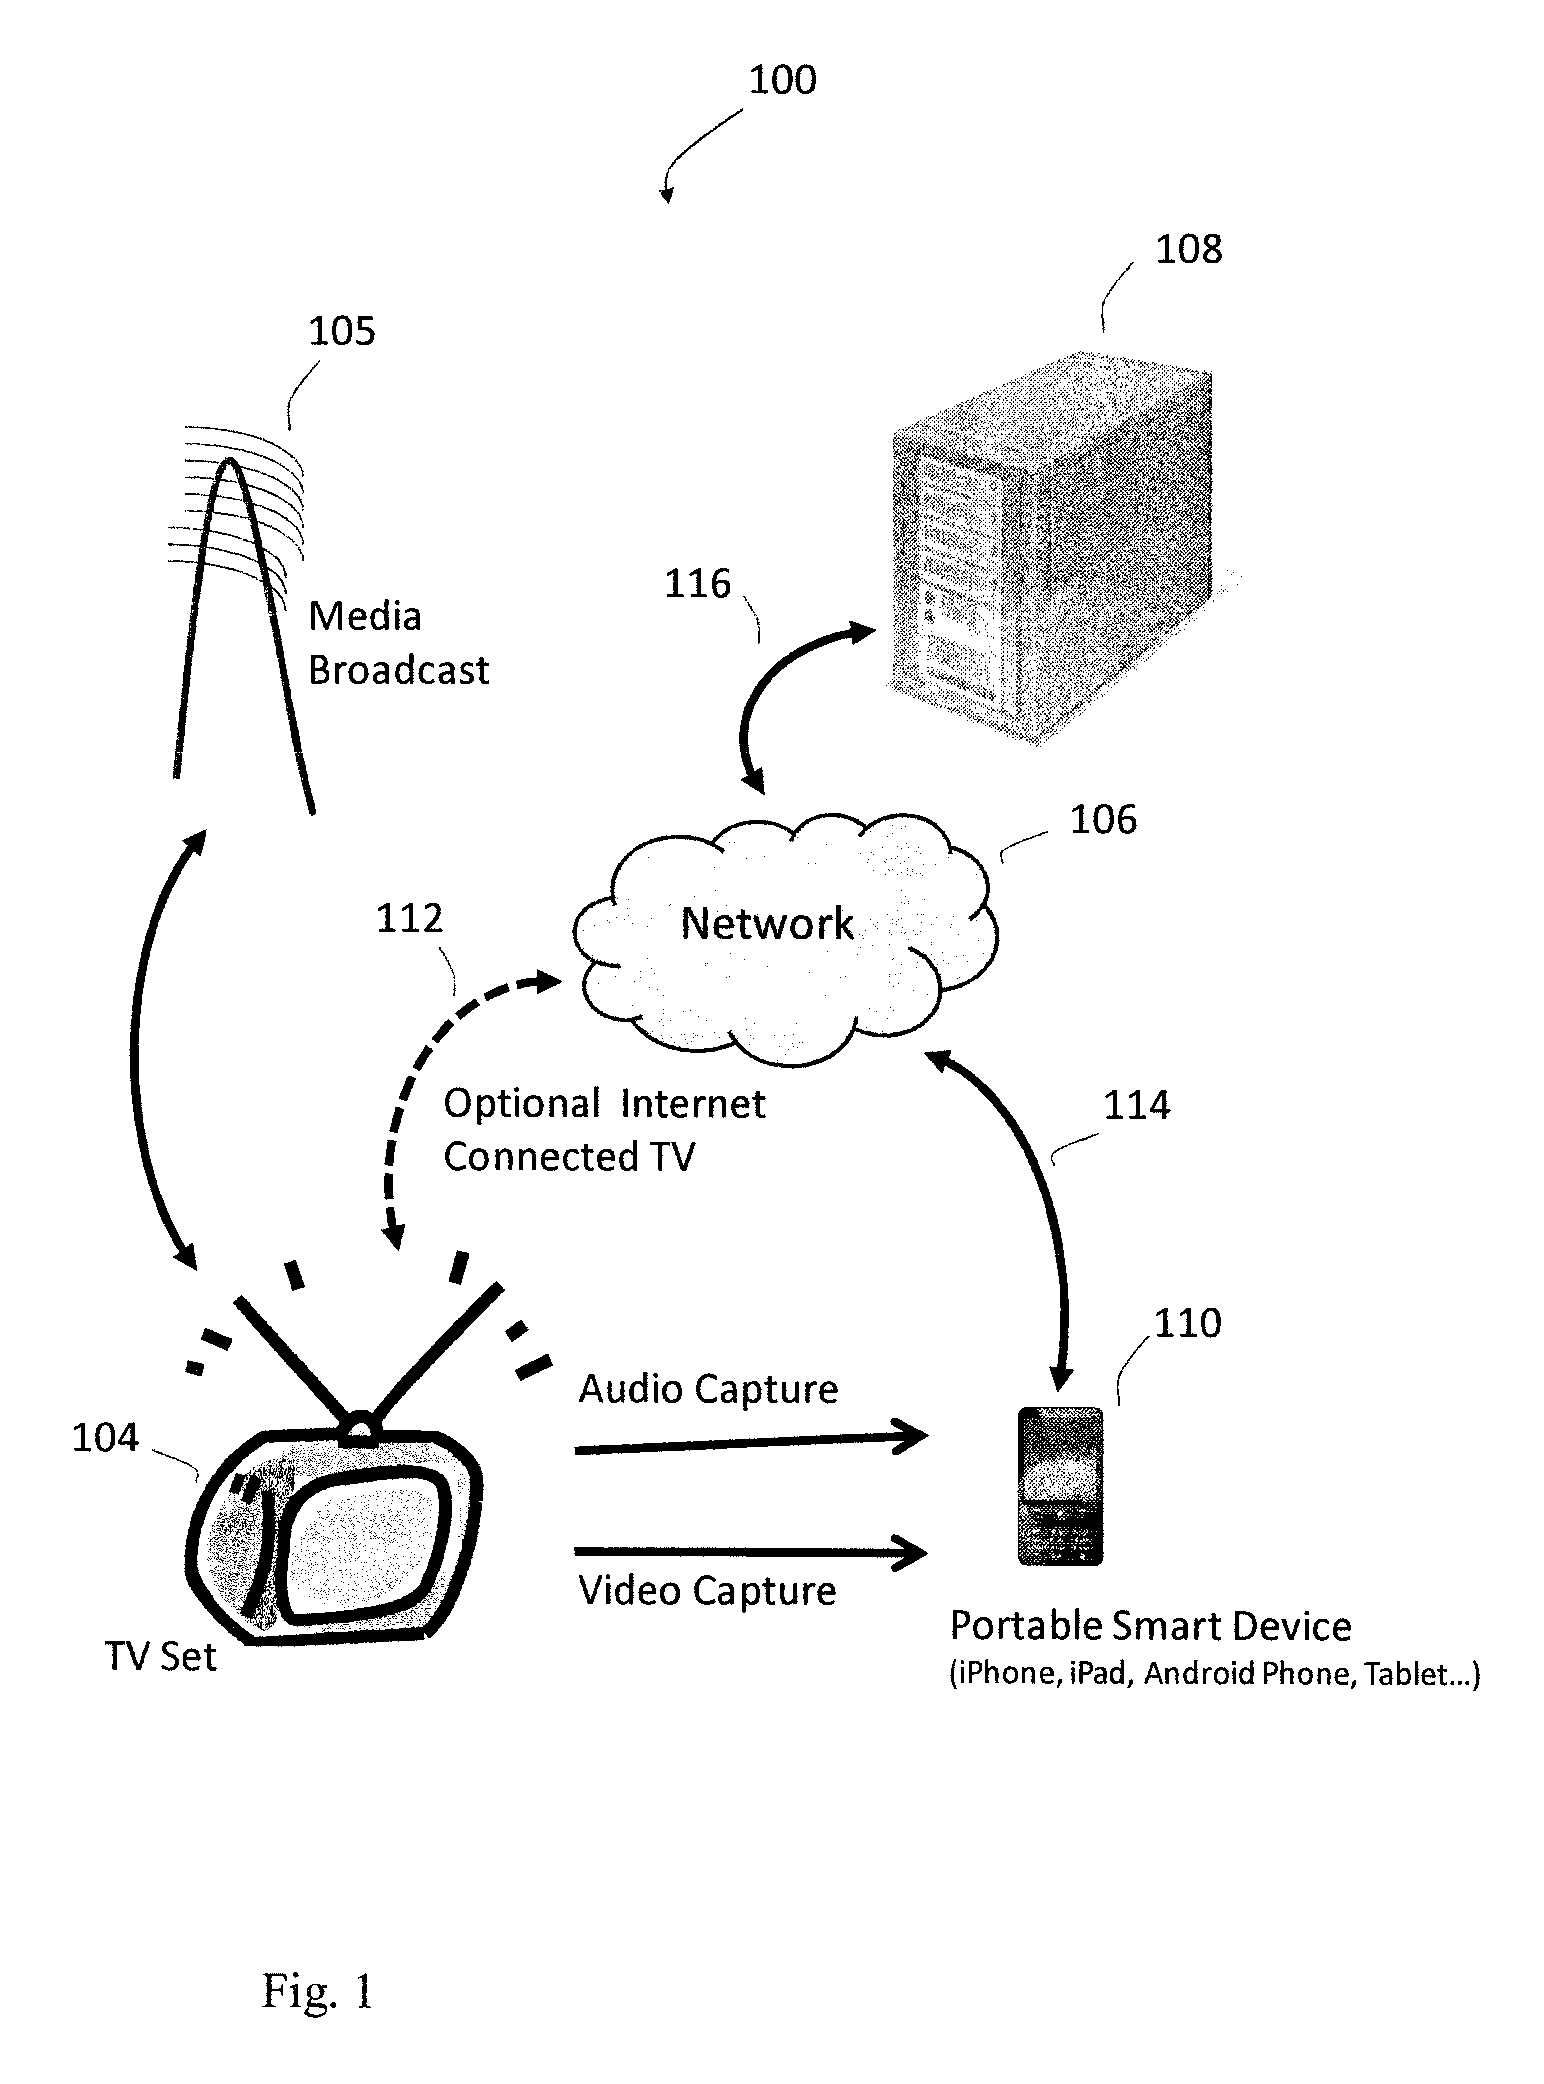 Method for efficient database formation and search on media devices acting synchronously with television programming